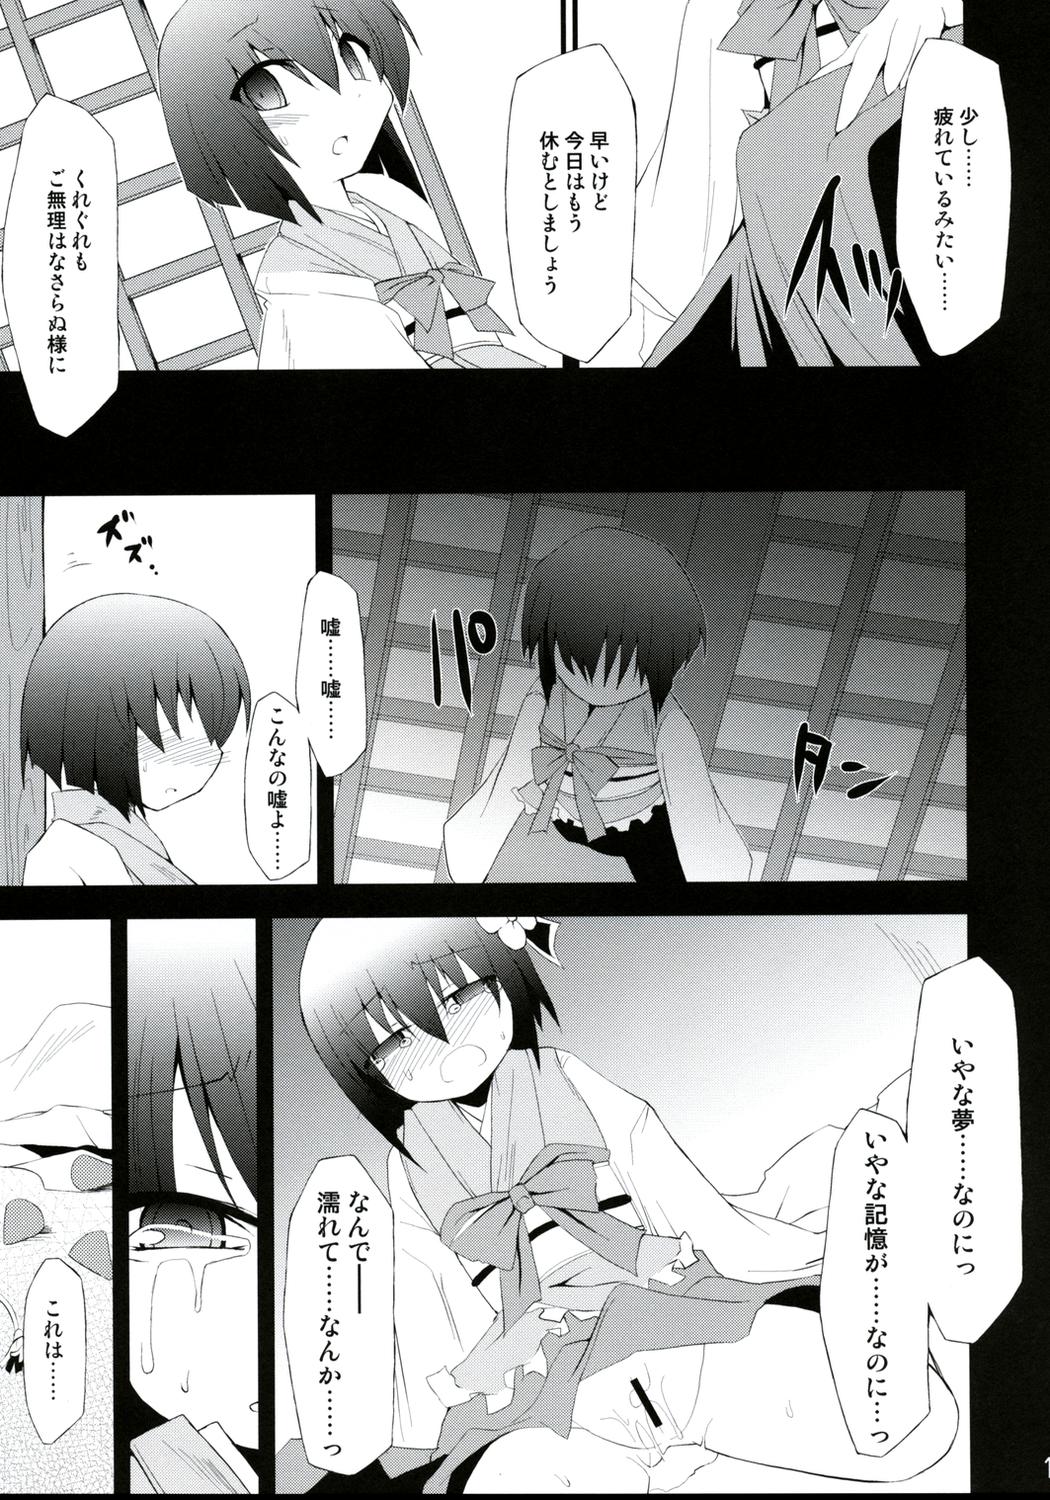 Roundass Saimin Ihen Yon - Cold Pulse - Touhou project Old Vs Young - Page 12